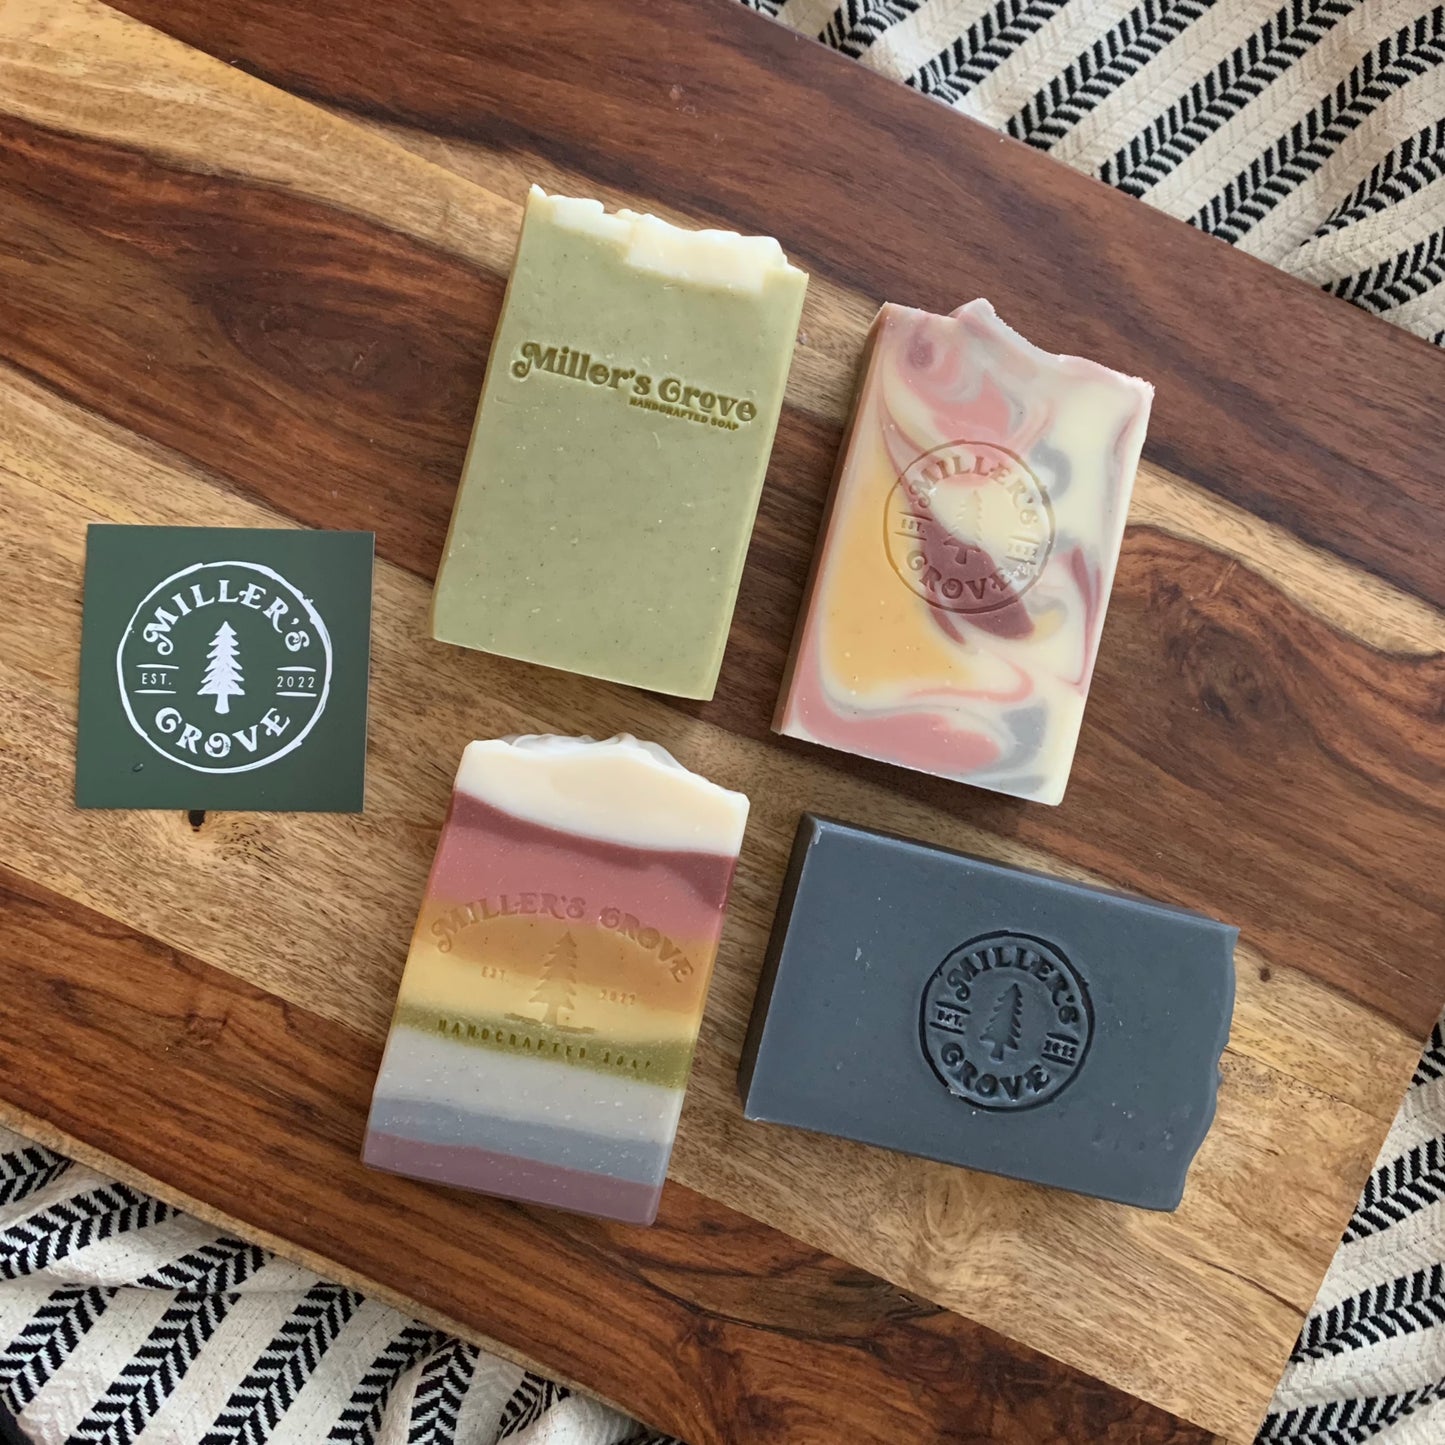 Four bars of soap (one green bar, one rainbow bar, one black bar and one swirly multi colored bar)